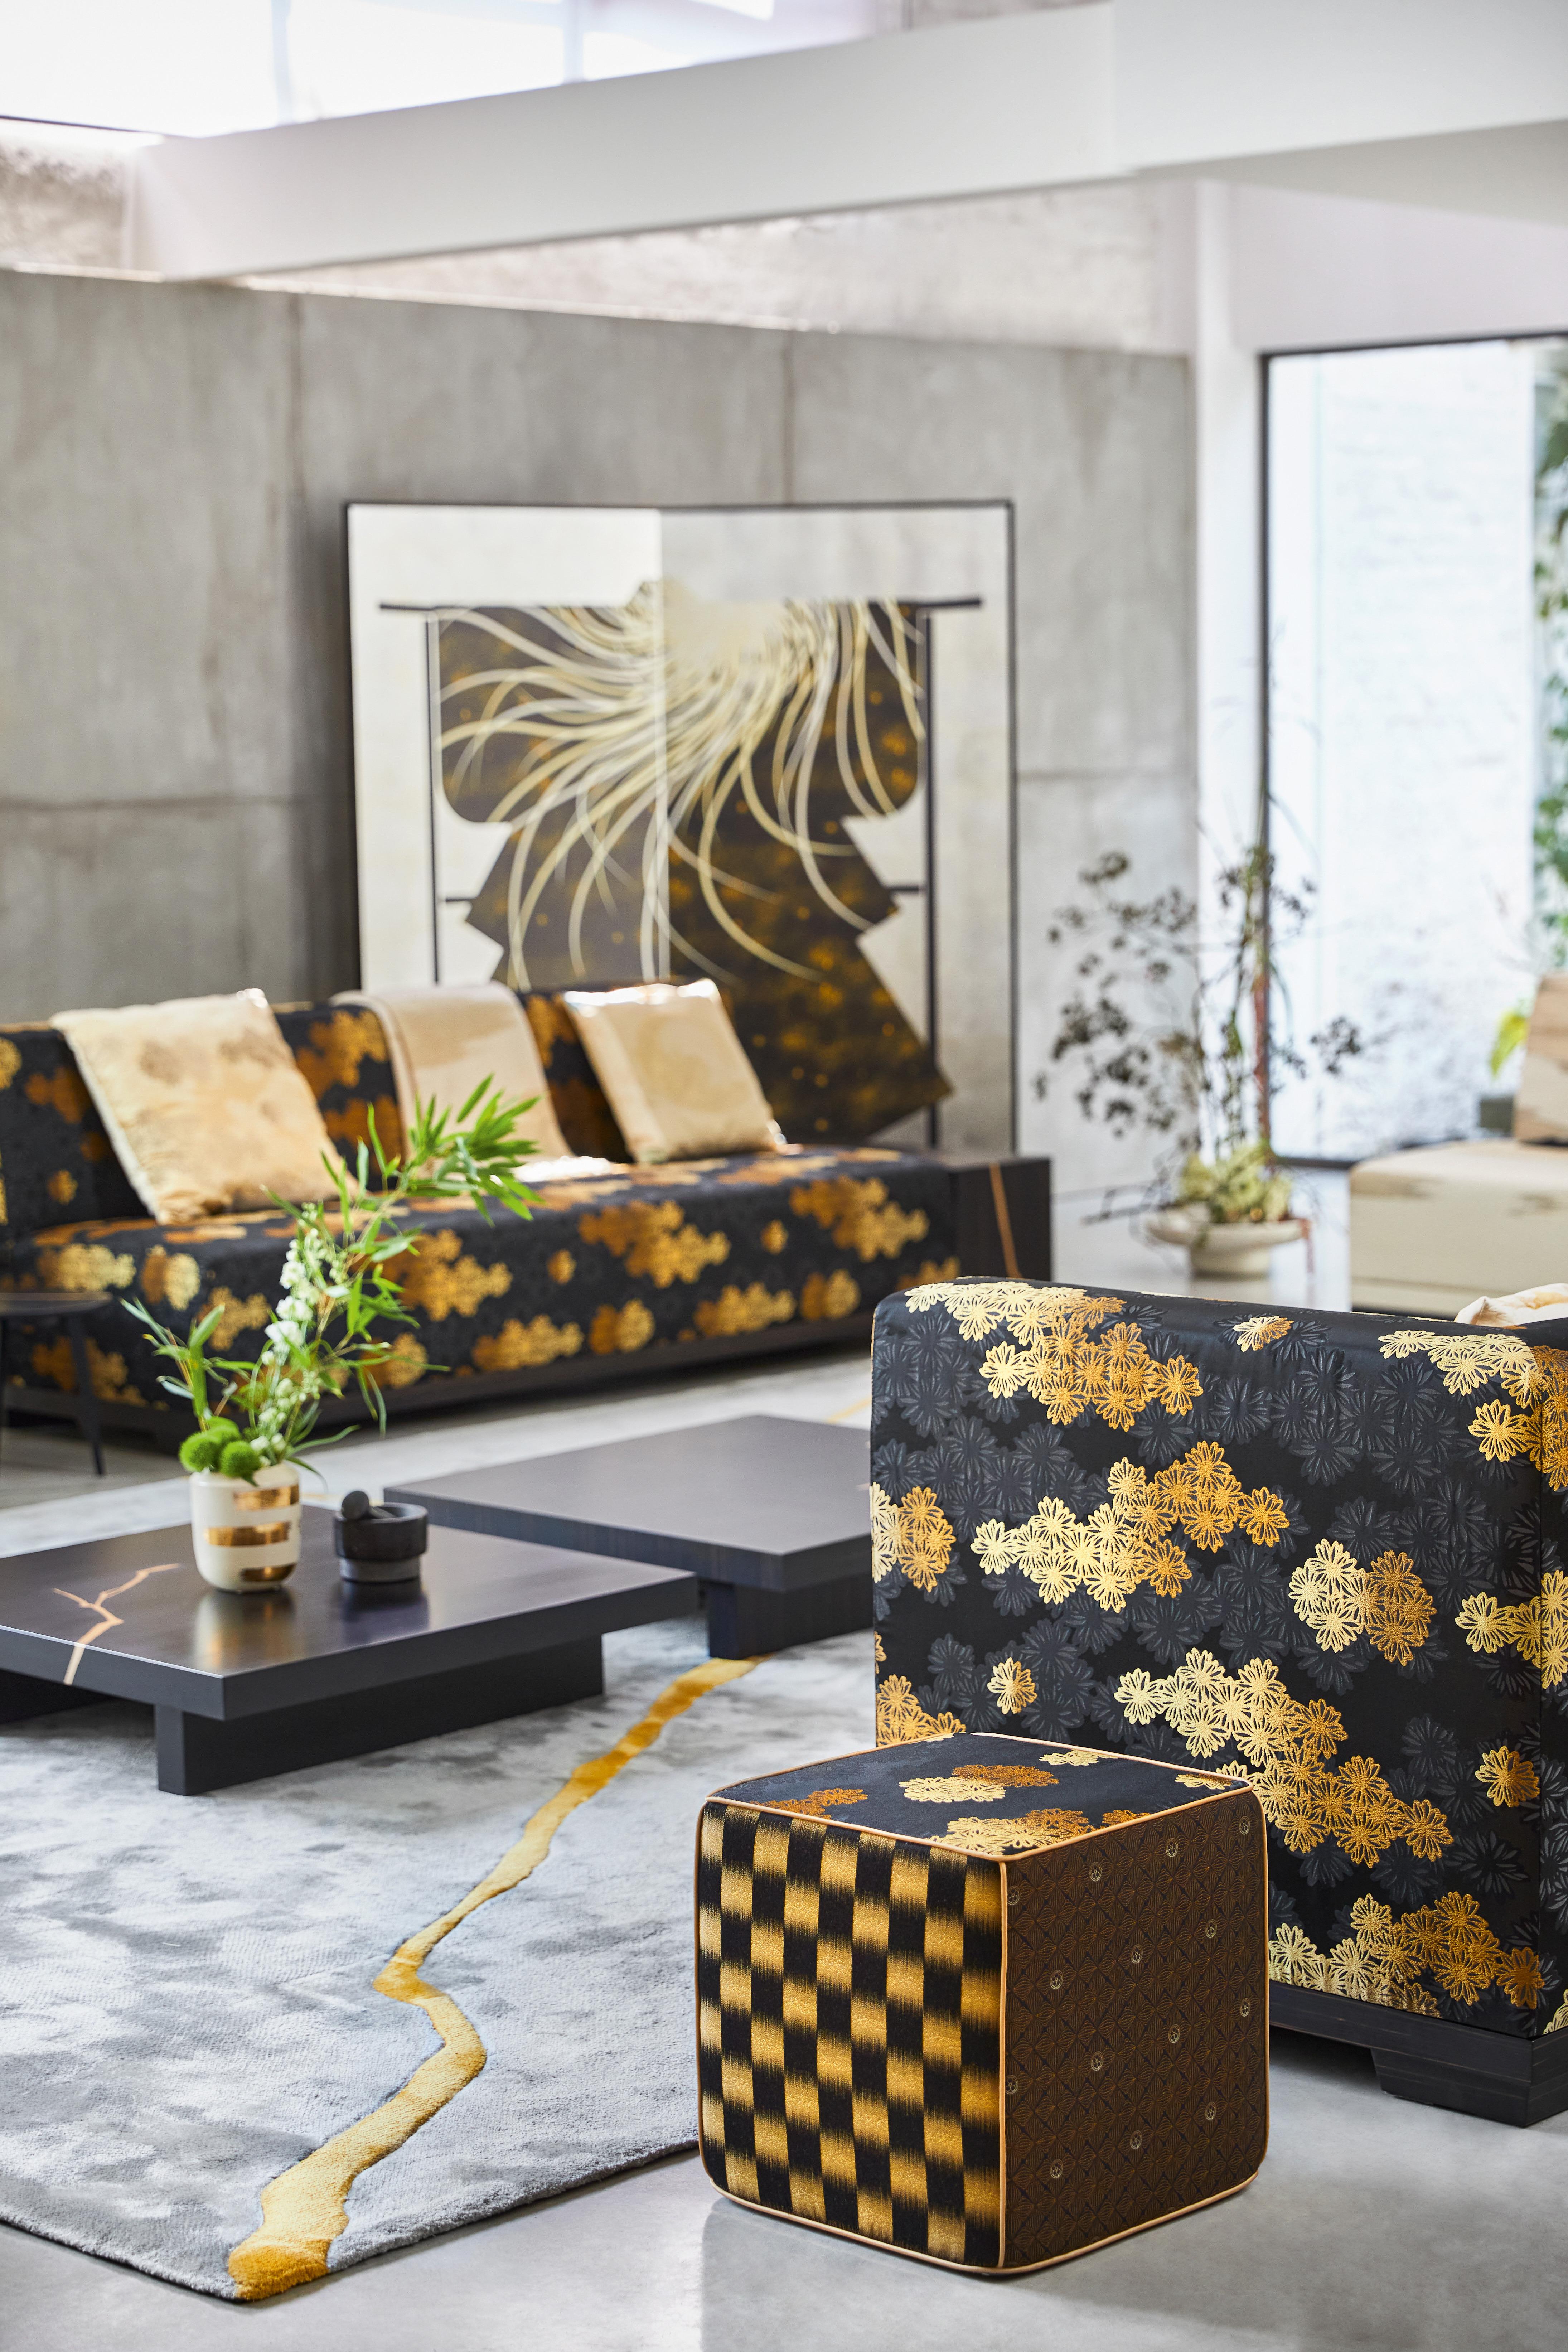 Crafted by the collaborative vision of K-3 and its iconic founder Kenzo Takada, this exquisite two-panel screen is a masterful blend of traditional Japanese artistry and modern design elements. Adorned with striking prints on silver leaf panels and